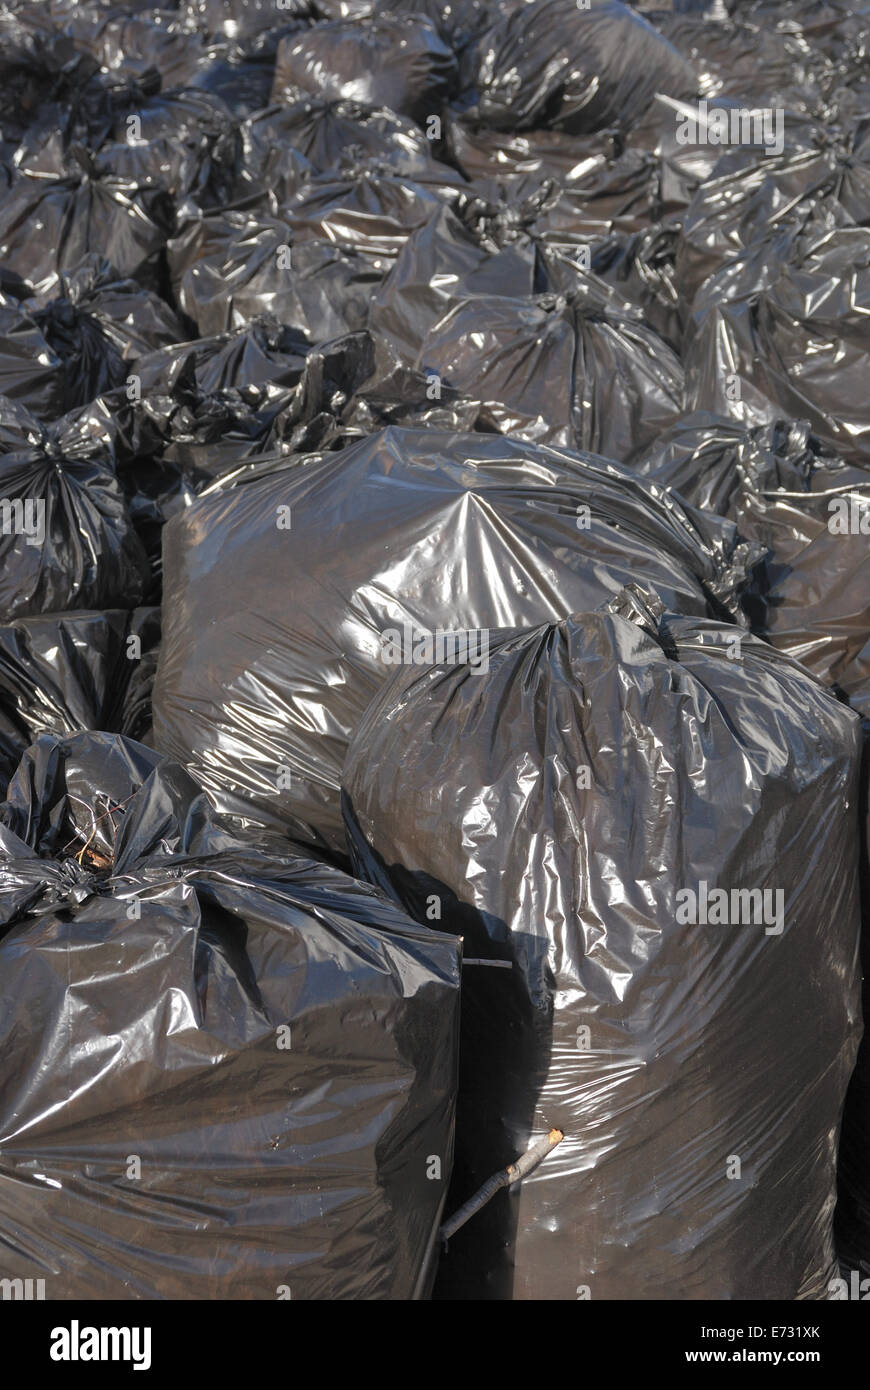 https://c8.alamy.com/comp/E731XK/pile-of-black-garbage-bags-with-tons-of-trash-E731XK.jpg